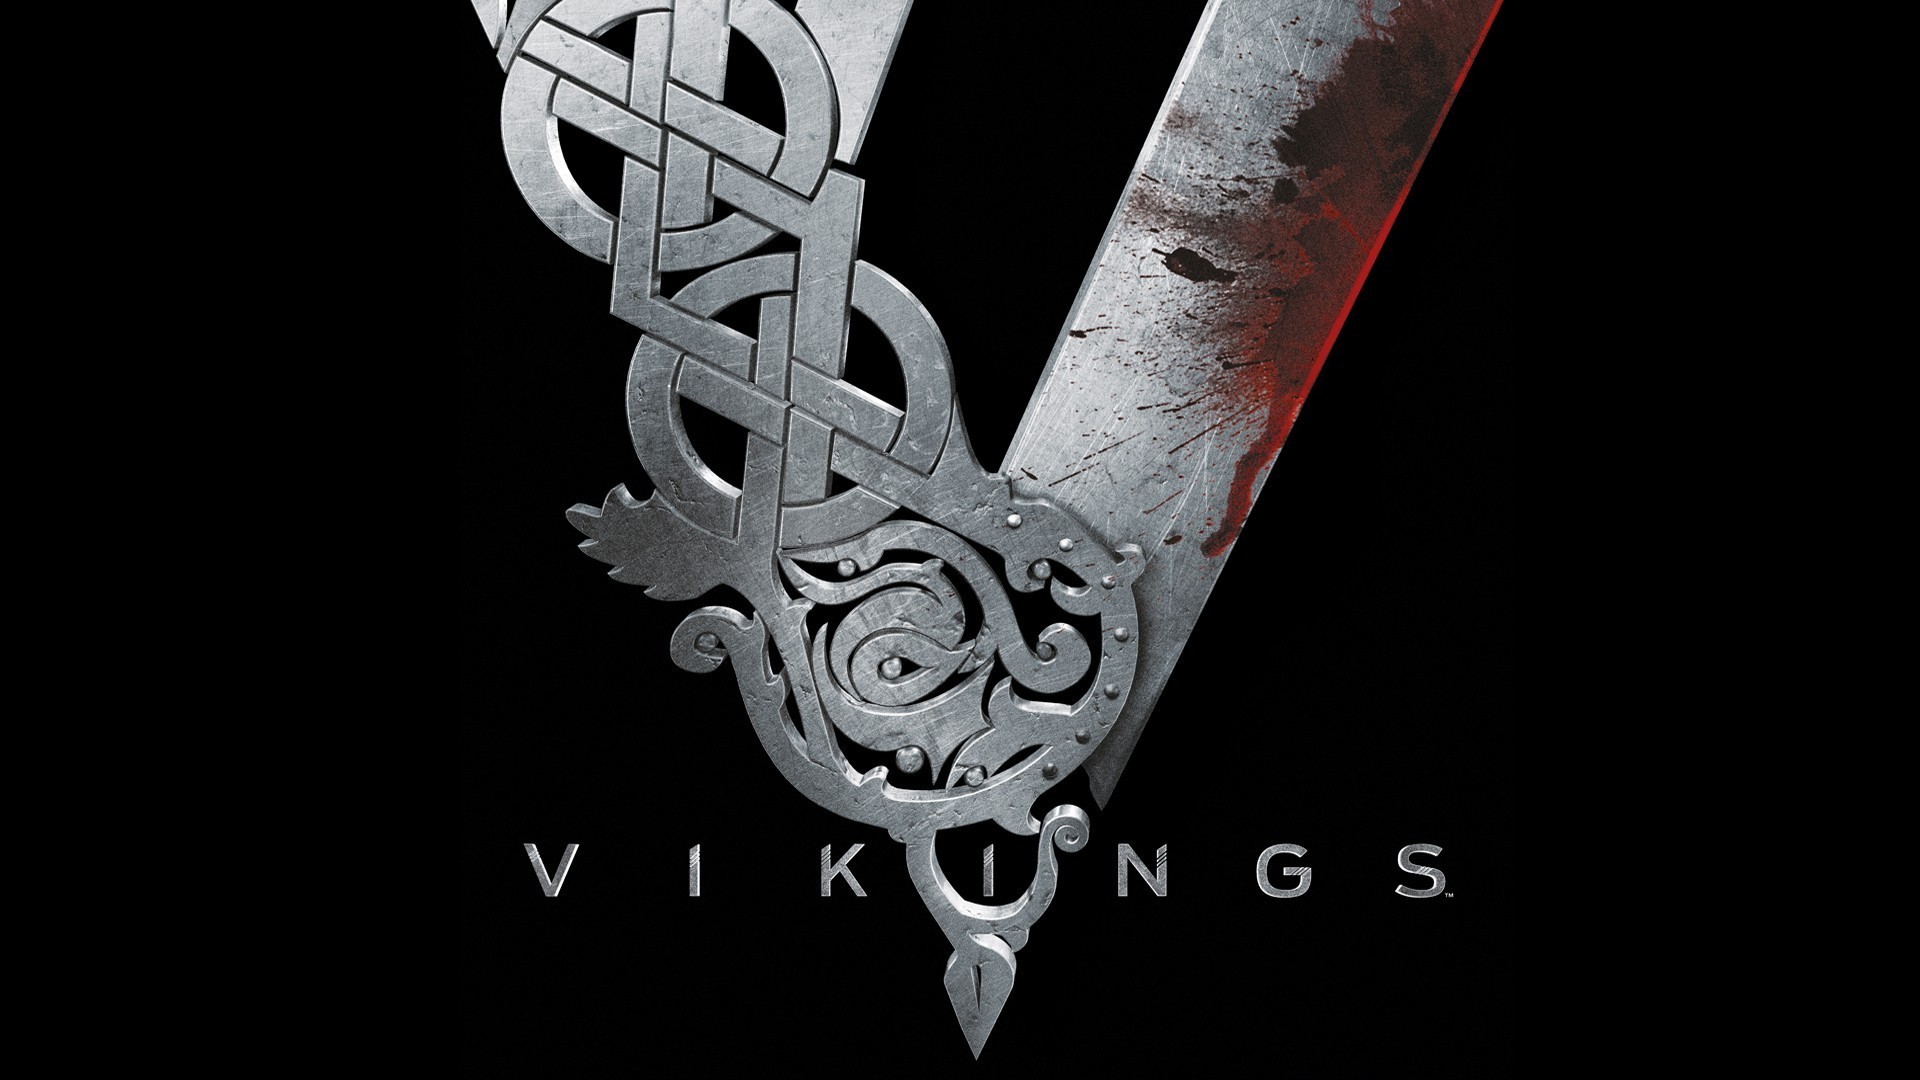 1920x1080 Vikings Wallpapers, High Quality Vikings Wallpapers Gallery, WX.3606430